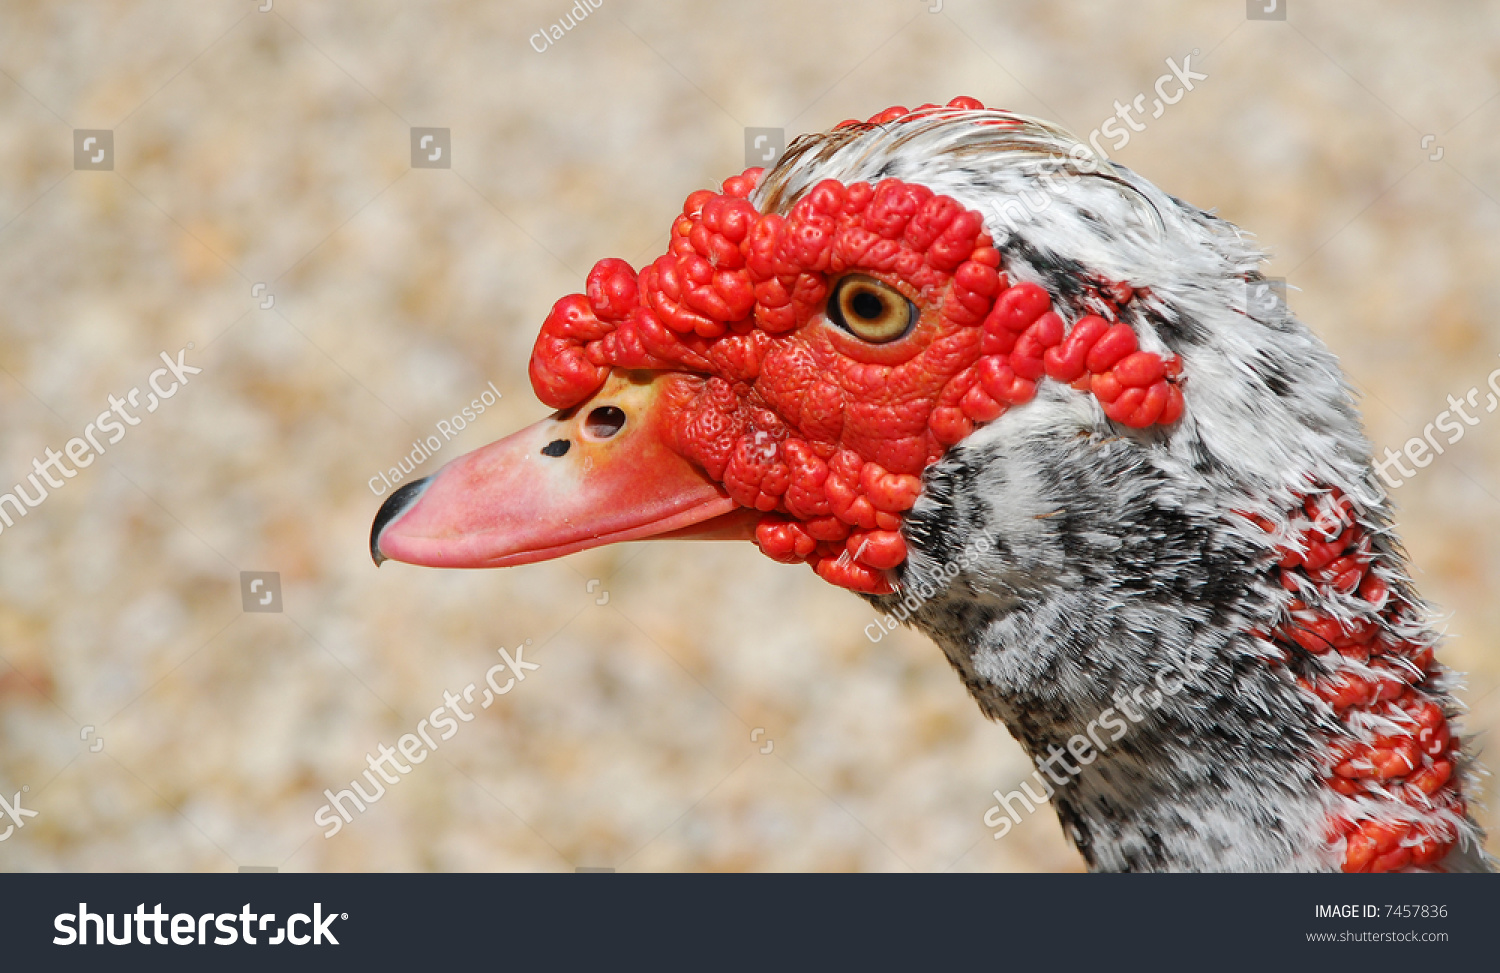 A Strange Looking Duck That Looks Kind Of Like A Turkey. Stock Photo